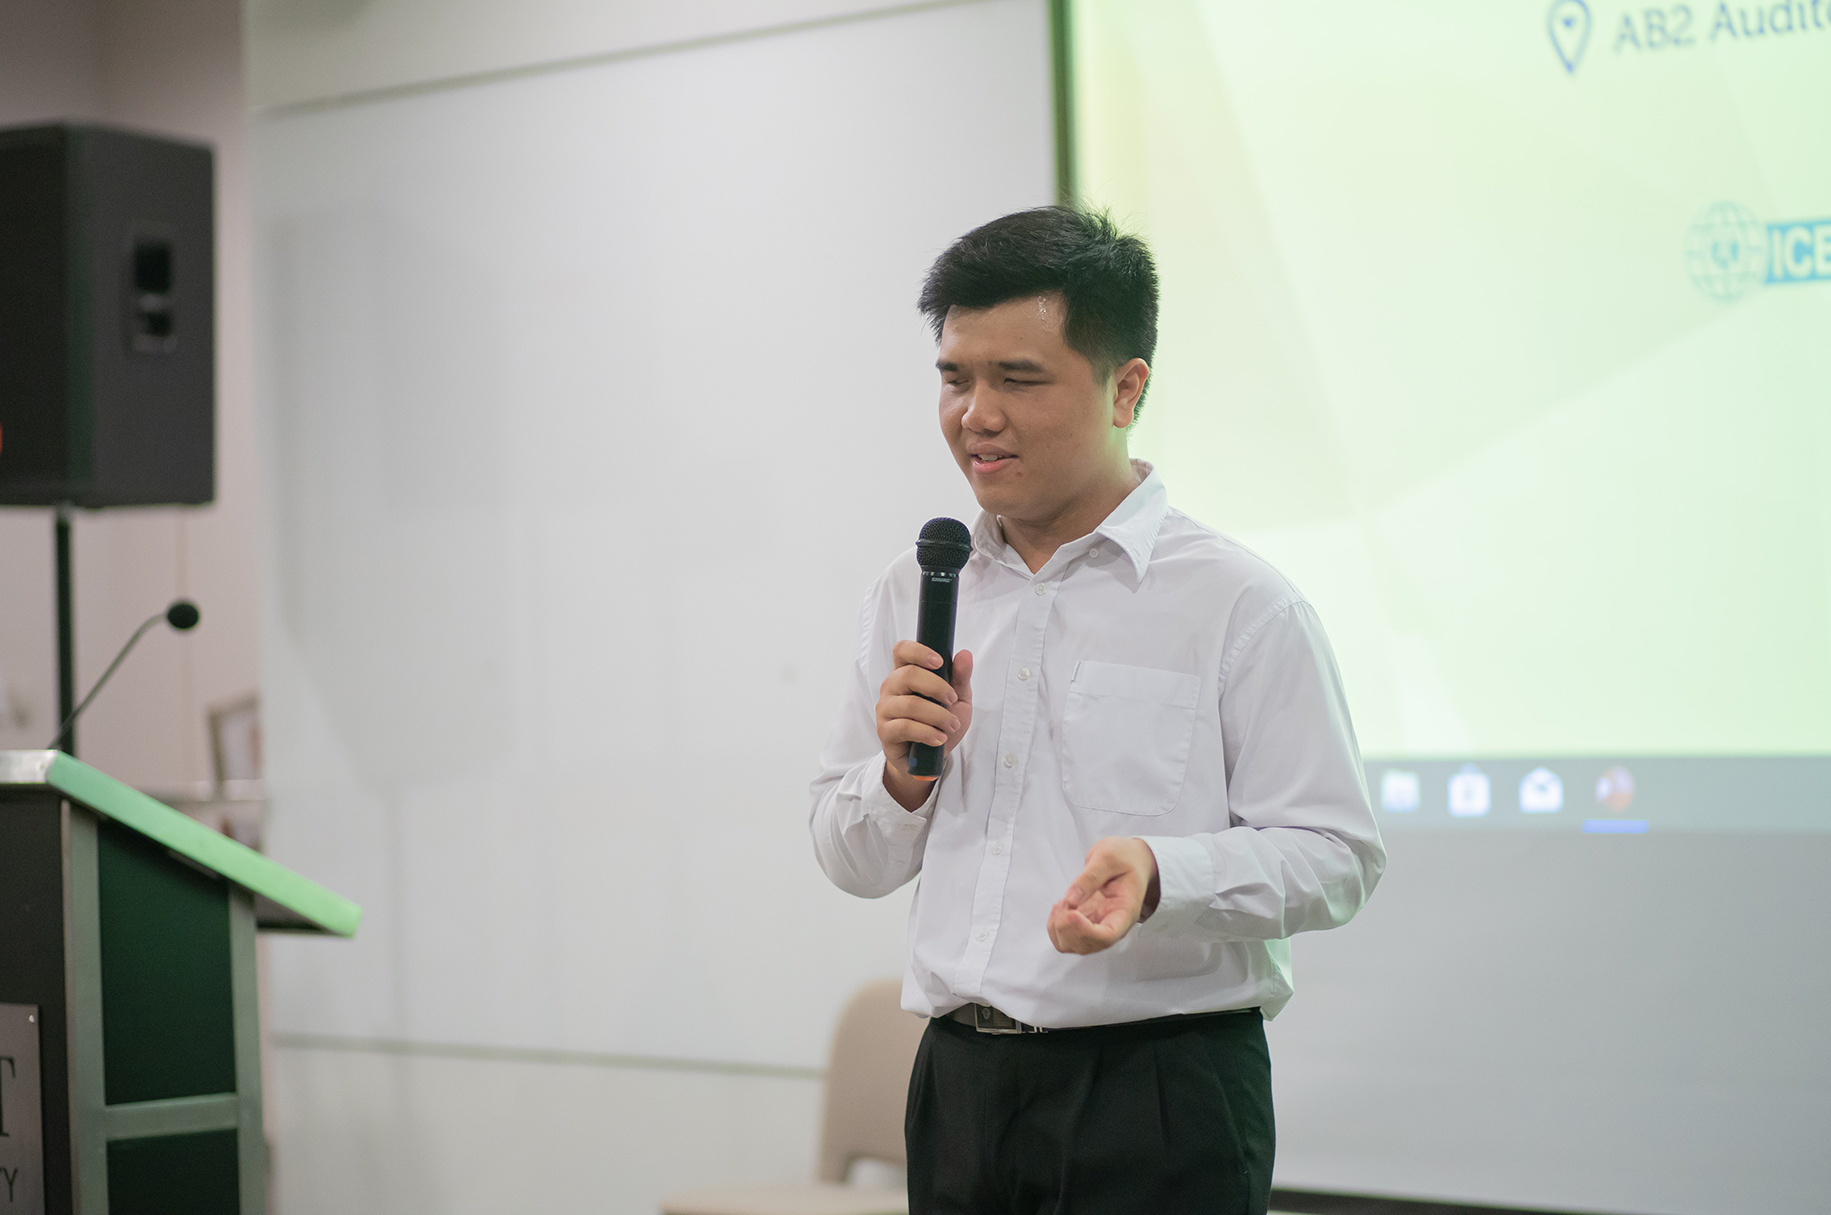 The very first RMIT Vietnam student with a significant visual impairment Nguyen Tuan Tu shared his learning experience at the inaugural Access and Inclusion Practices in Higher Education at RMIT’s Saigon South campus.  